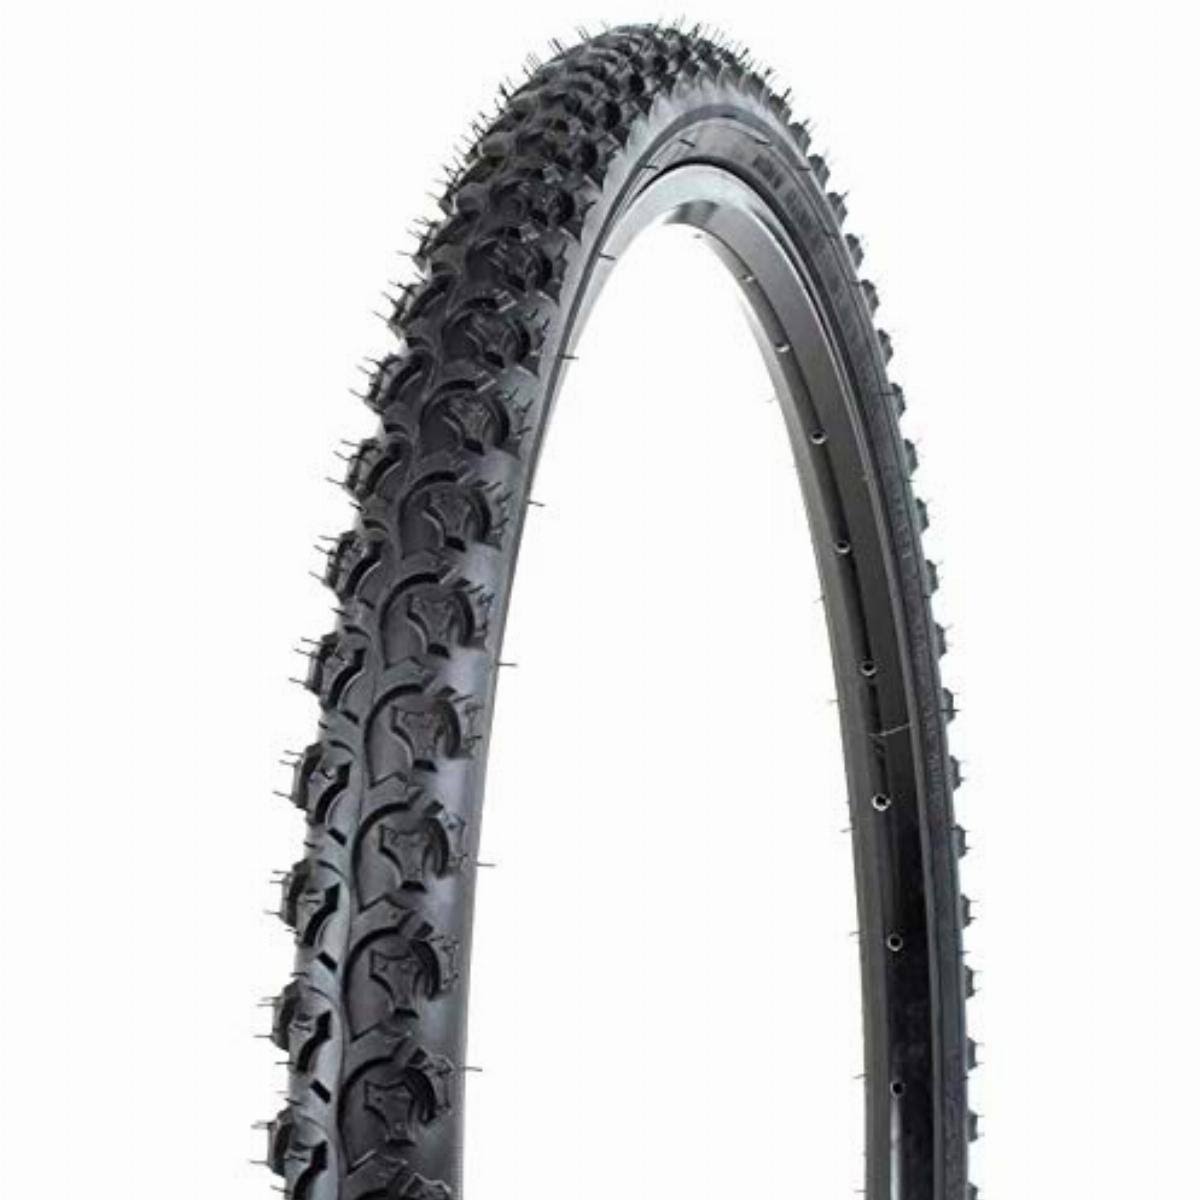 Kenda A-Bite ATB Wire Bead Bicycle Tire - 26" x 1.95", Black